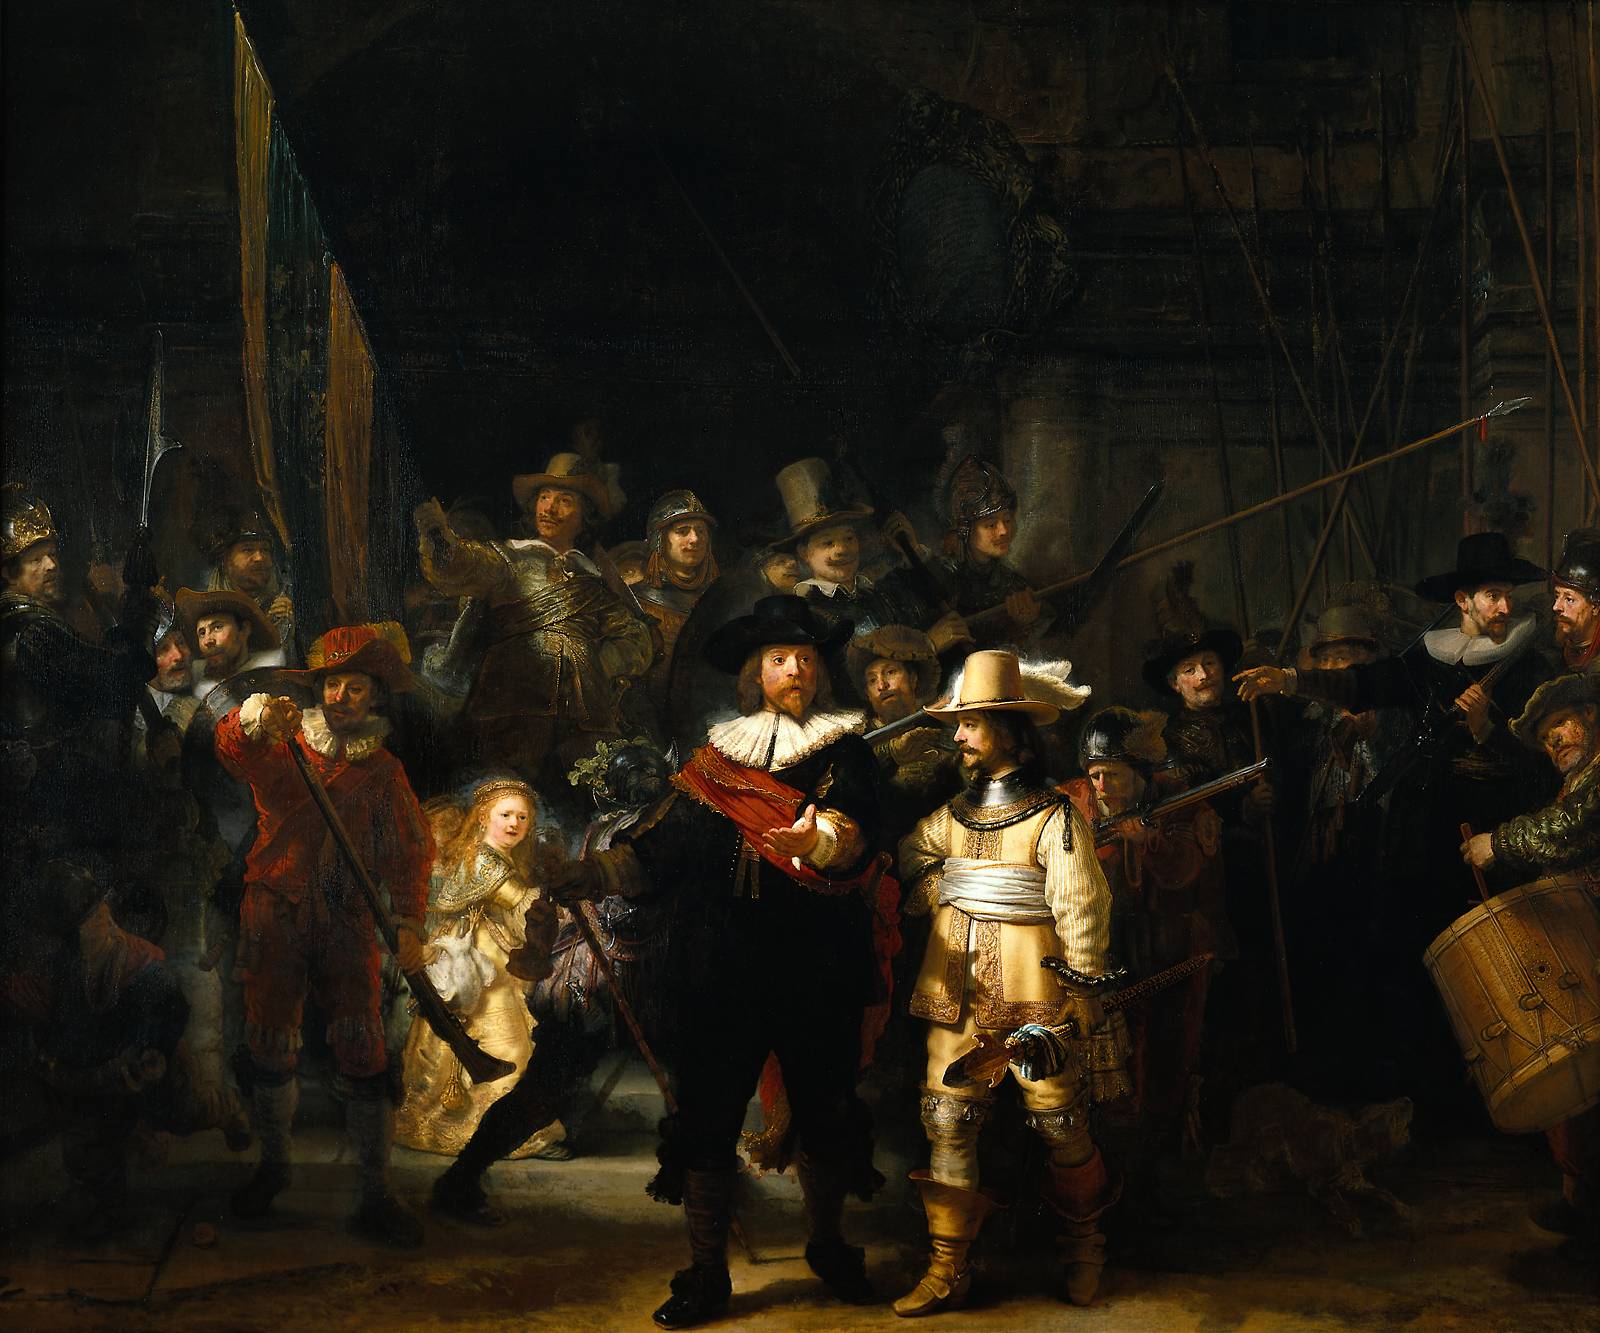 Rembrandt, The Night Watch, 1642